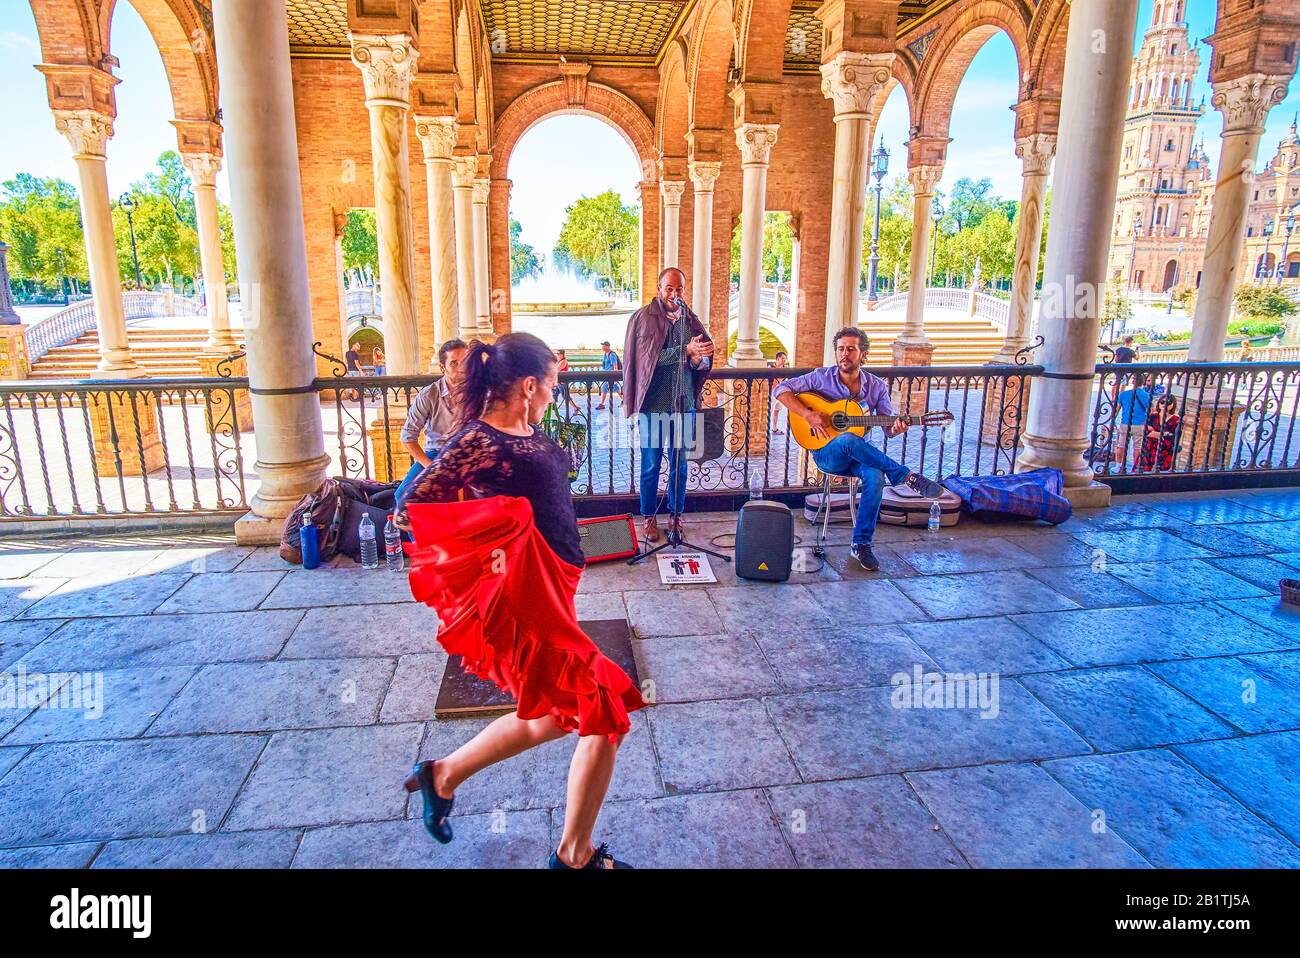 SEVILLE, SPAIN - OCTOBER 1, 2019: The emotional Andalusian flamenco dance with music accompaniment, performing on Plaza de Espana, on October 1 in Sev Stock Photo